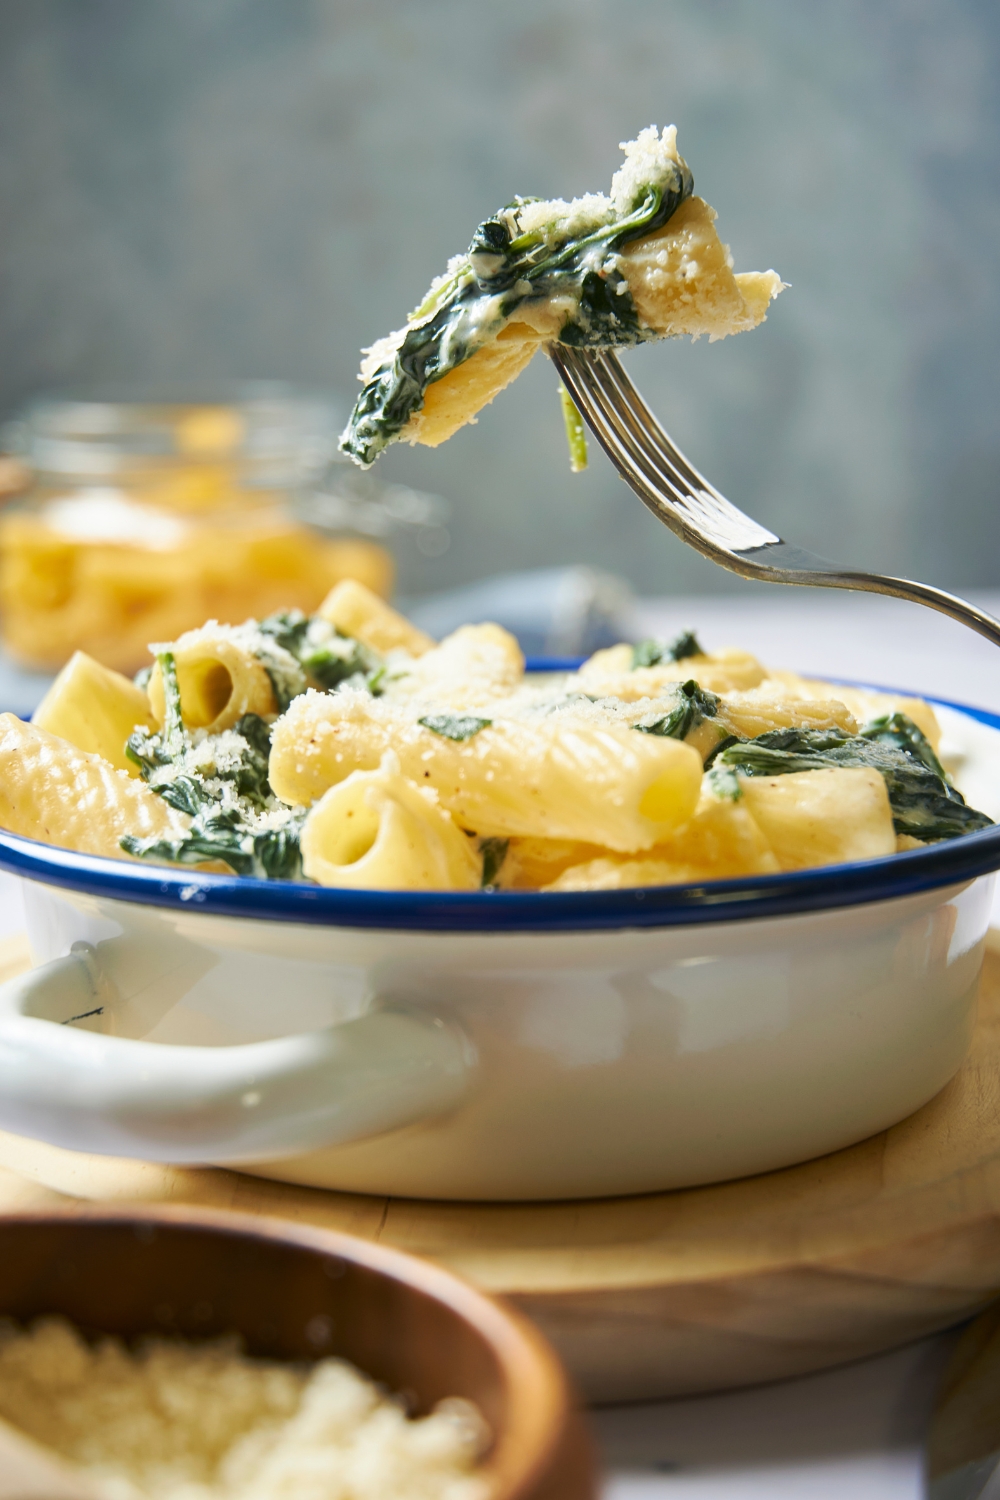 A bowl with spinach pasta topped with parmesan cheese. A fork is lifting a scoop of the spinach pasta above the bowl.